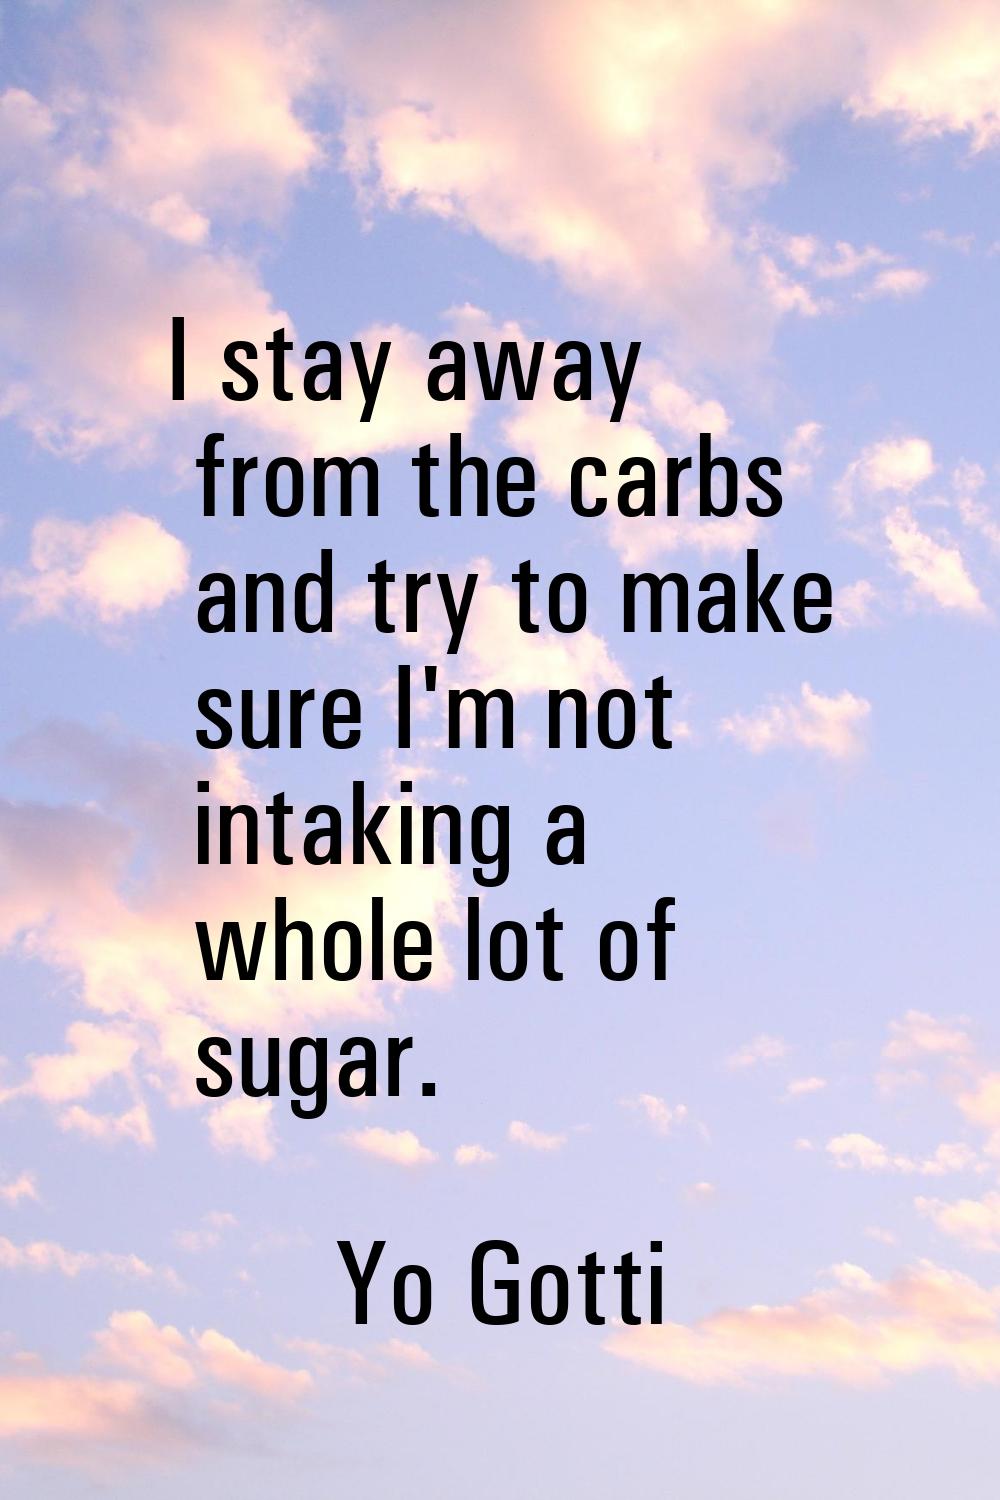 I stay away from the carbs and try to make sure I'm not intaking a whole lot of sugar.